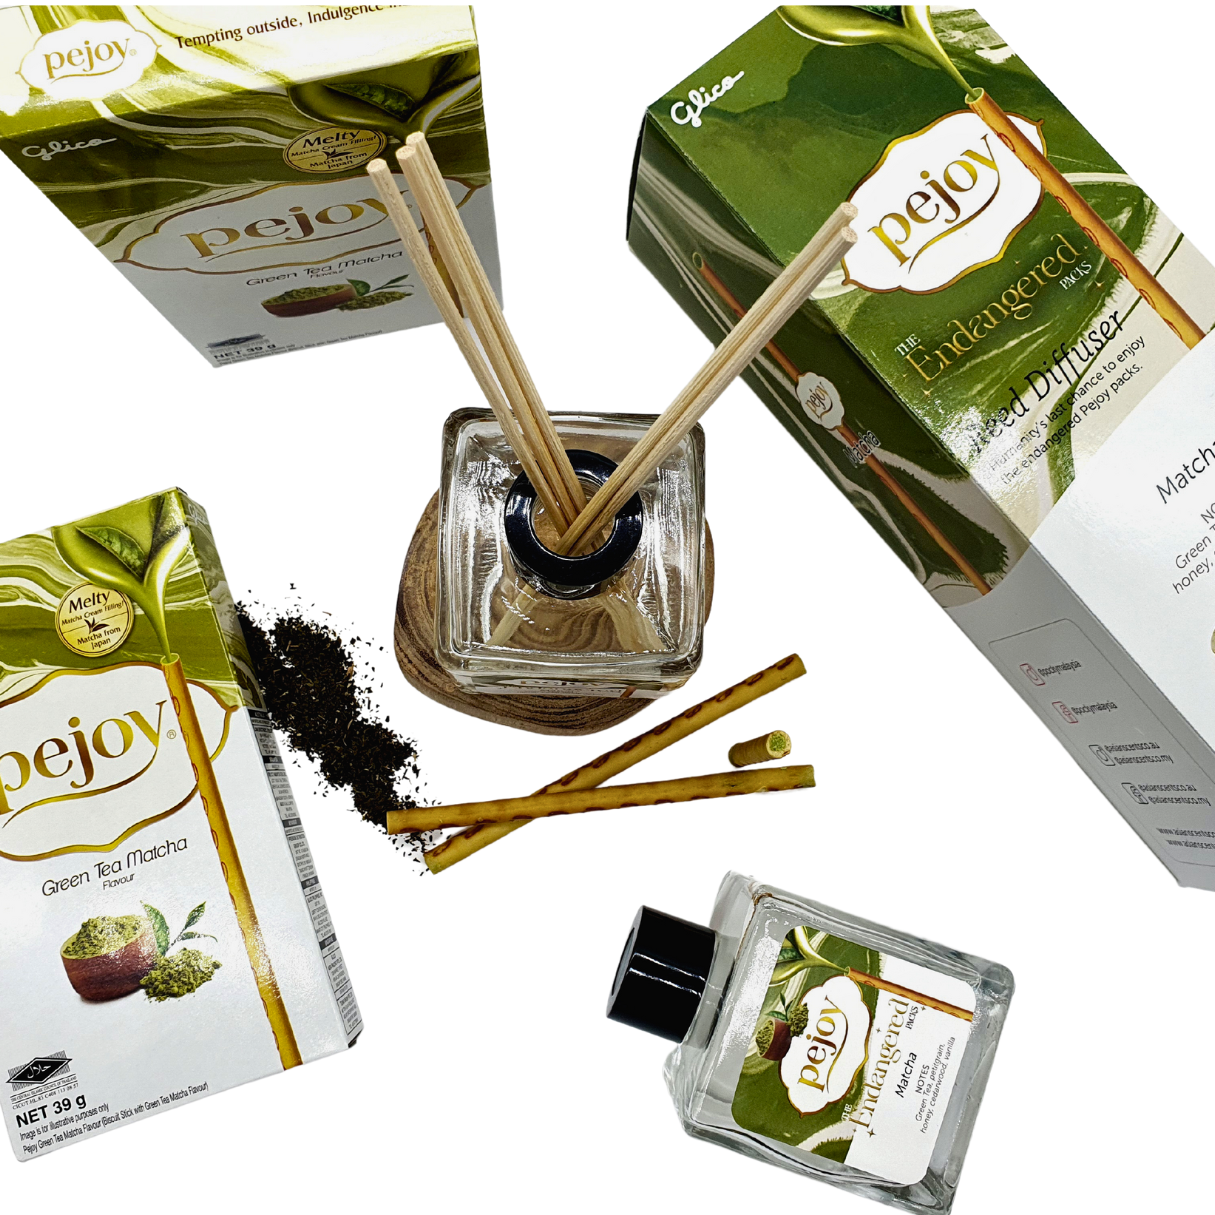 Asian Scents Co. x Pejoy Matcha Green Tea reed diffuser 100ml *Limited Edition*